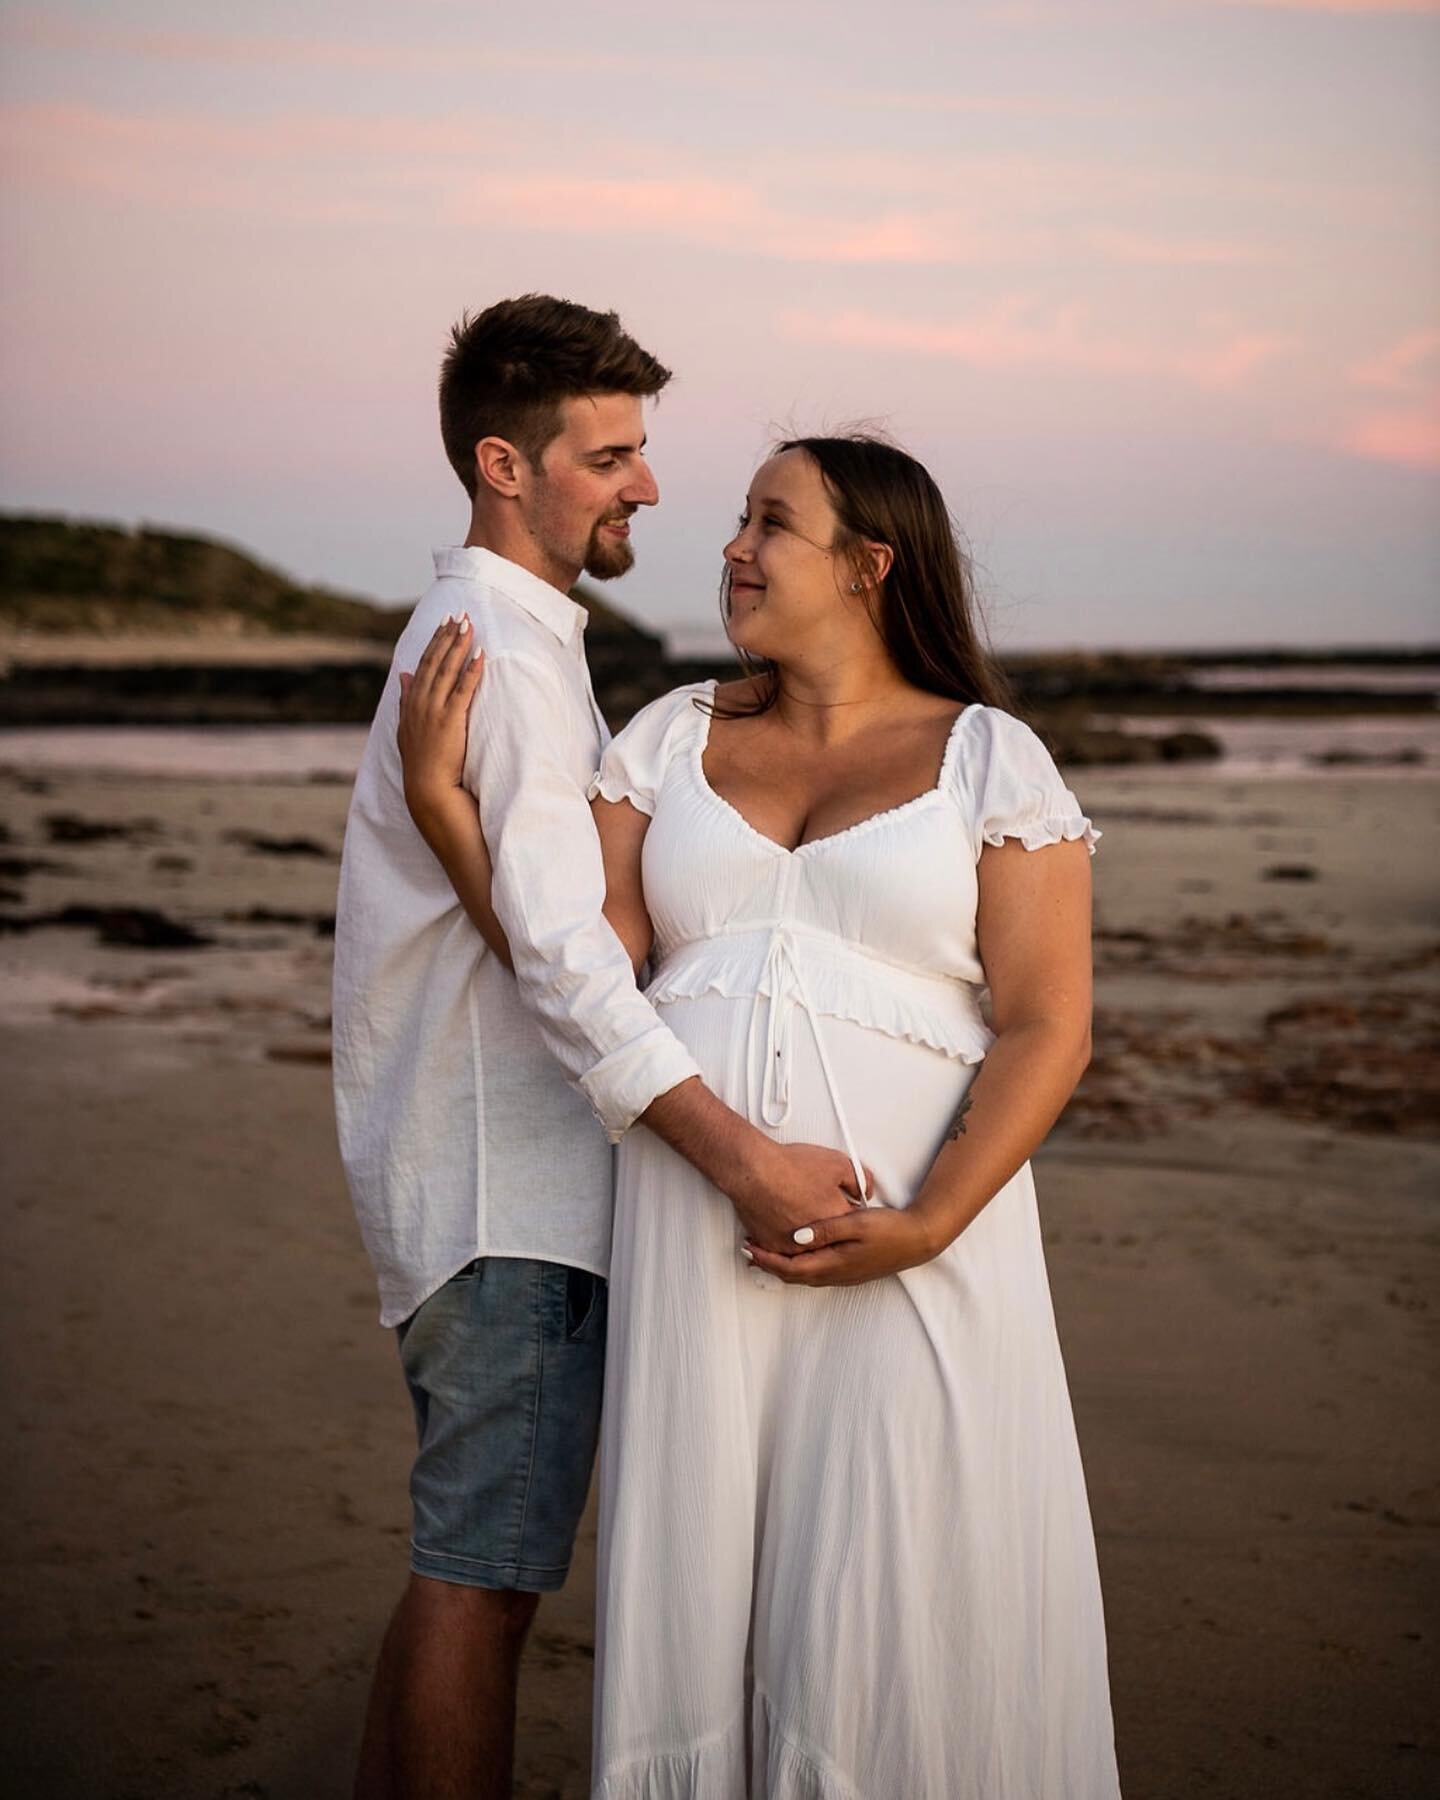 Sunset lovers 🌞🌊🌿

What a special maternity session this one was for a long time friend of mine. I photographed Chavii and Daniel back when their beautiful blessing was growing, this session was especially a momentous one as the sun painted the sk